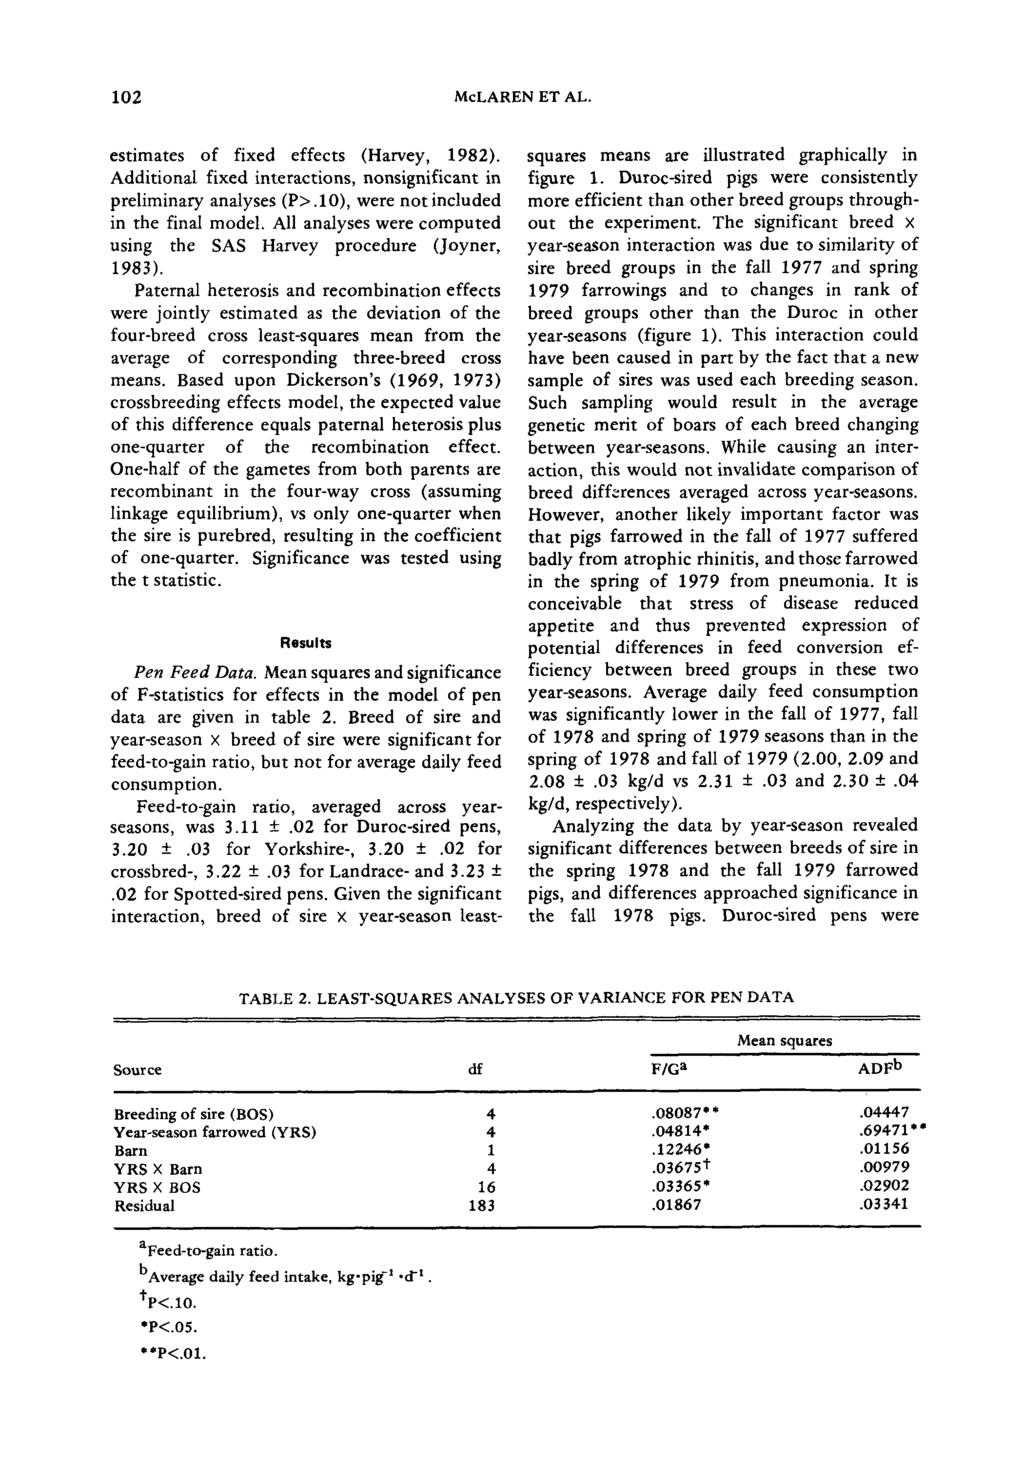 102 McLAREN ET AL. estimates of fixed effects (Harvey, 1982). Additional fixed interactions, nonsignificant in preliminary analyses (P>.10), were not included in the final model.